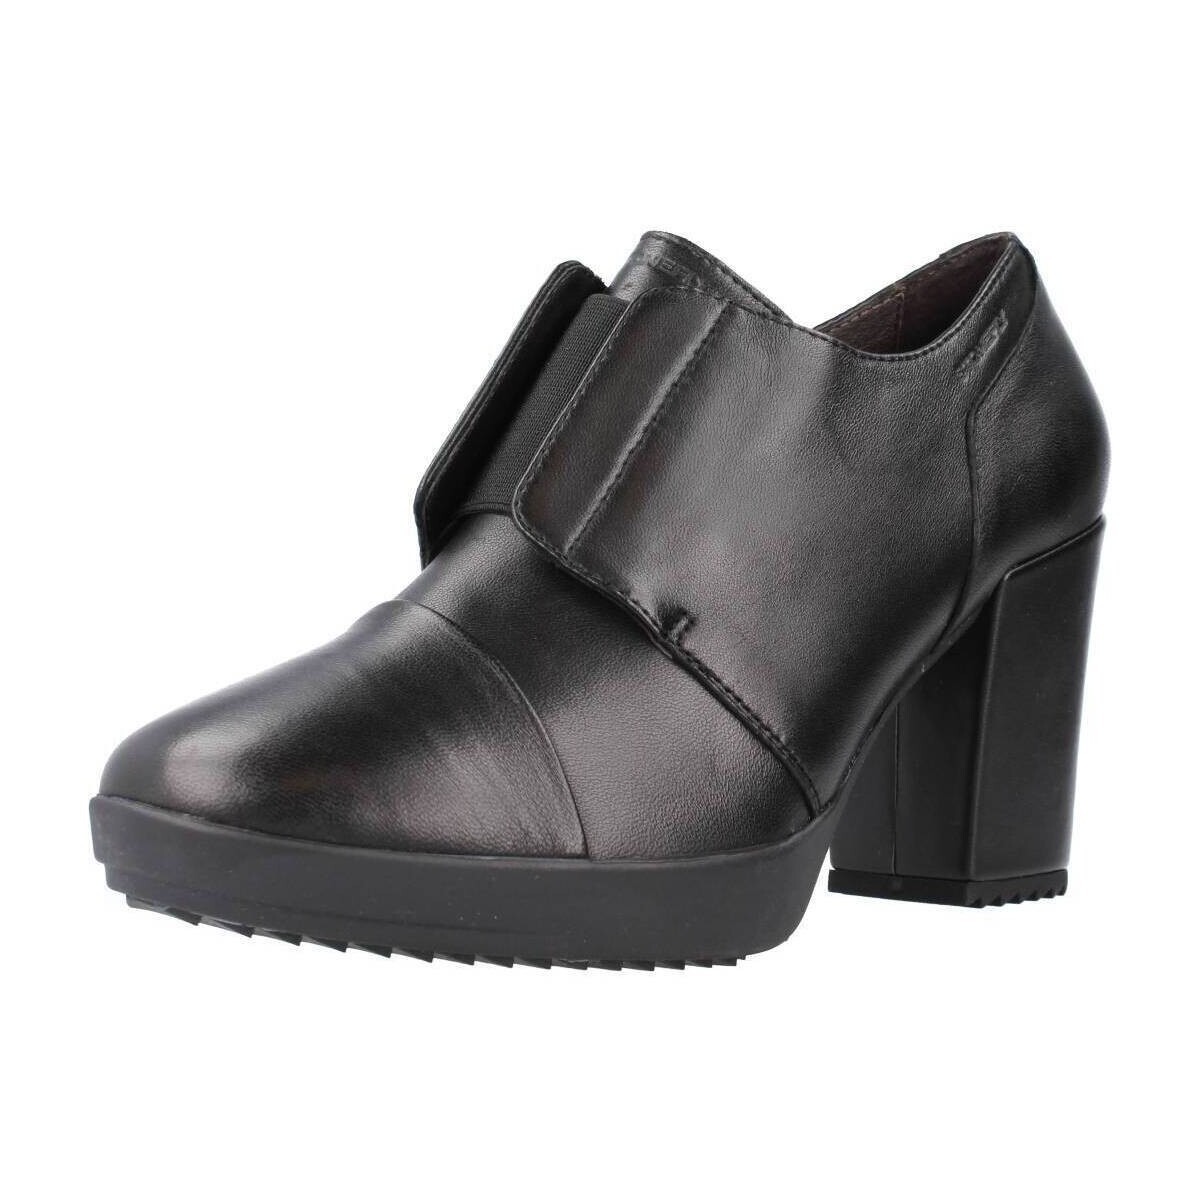 Spartoo - Black - Women's Ankle Boots - Stonefly GOOFASH